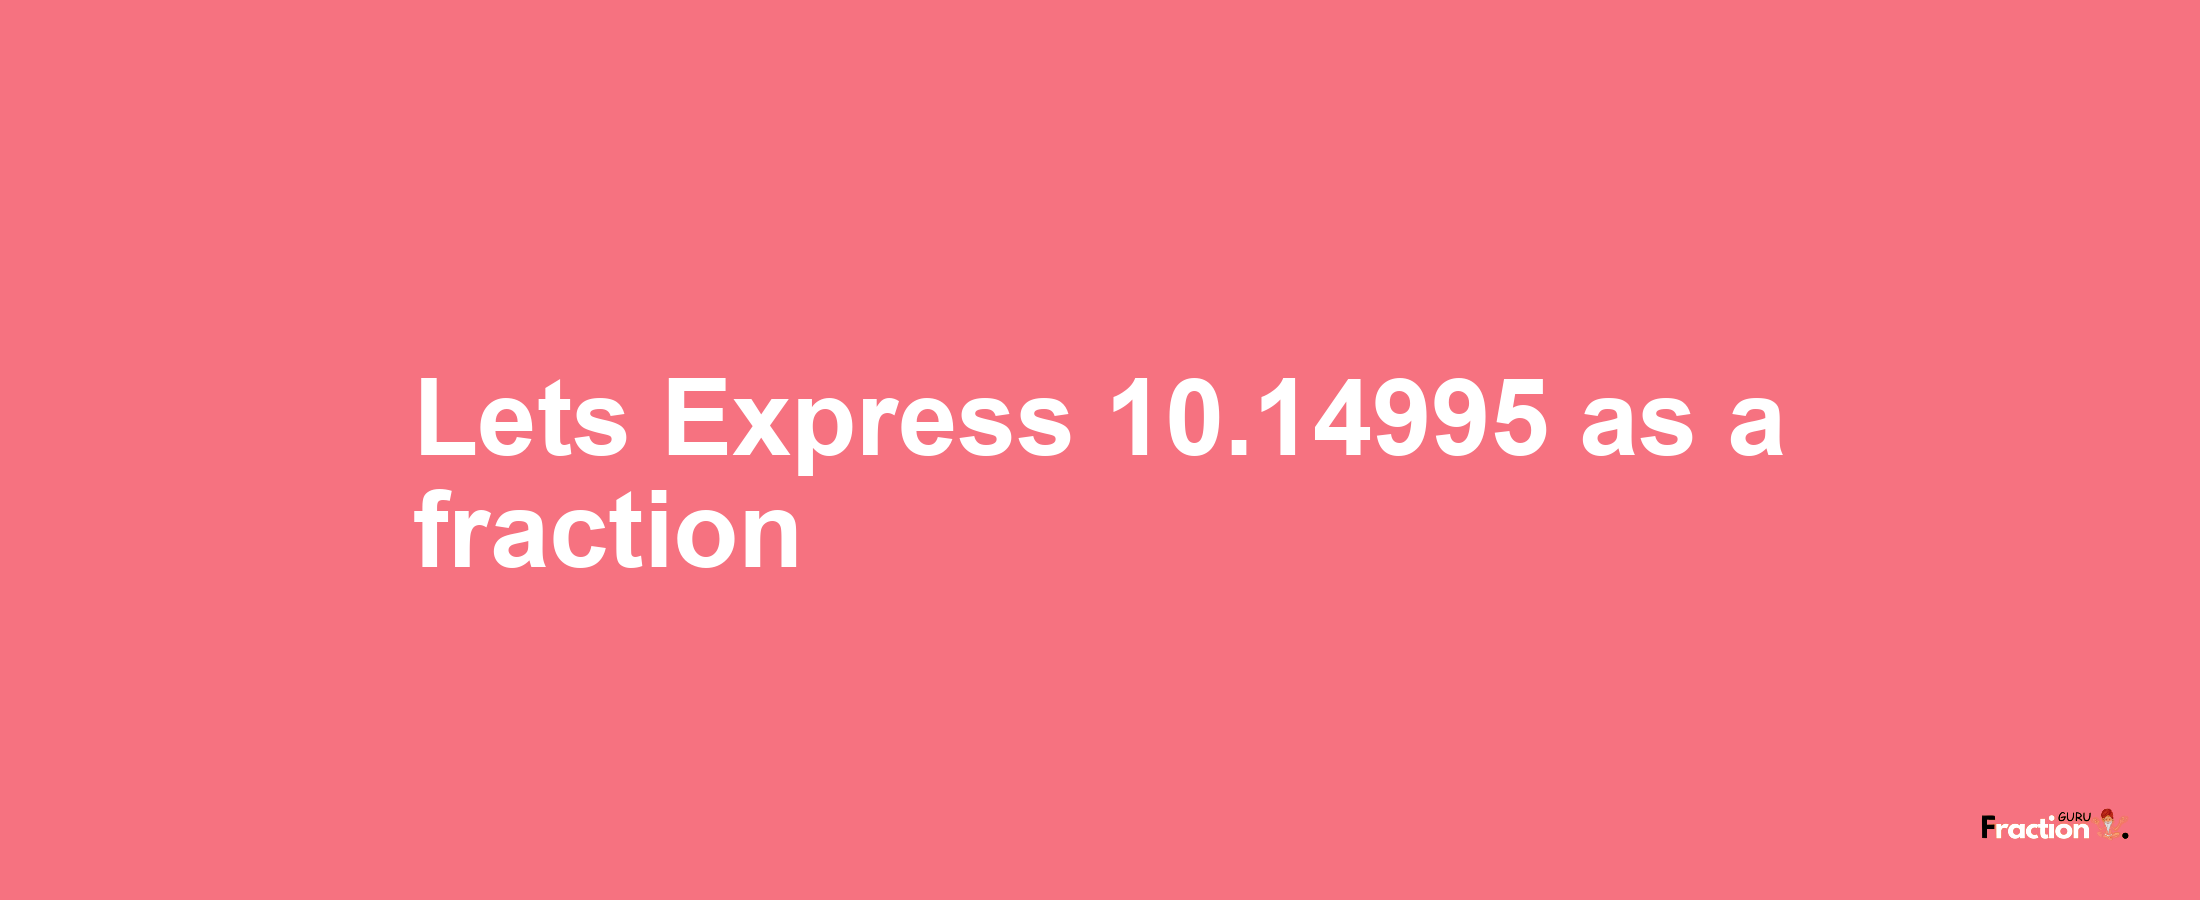 Lets Express 10.14995 as afraction